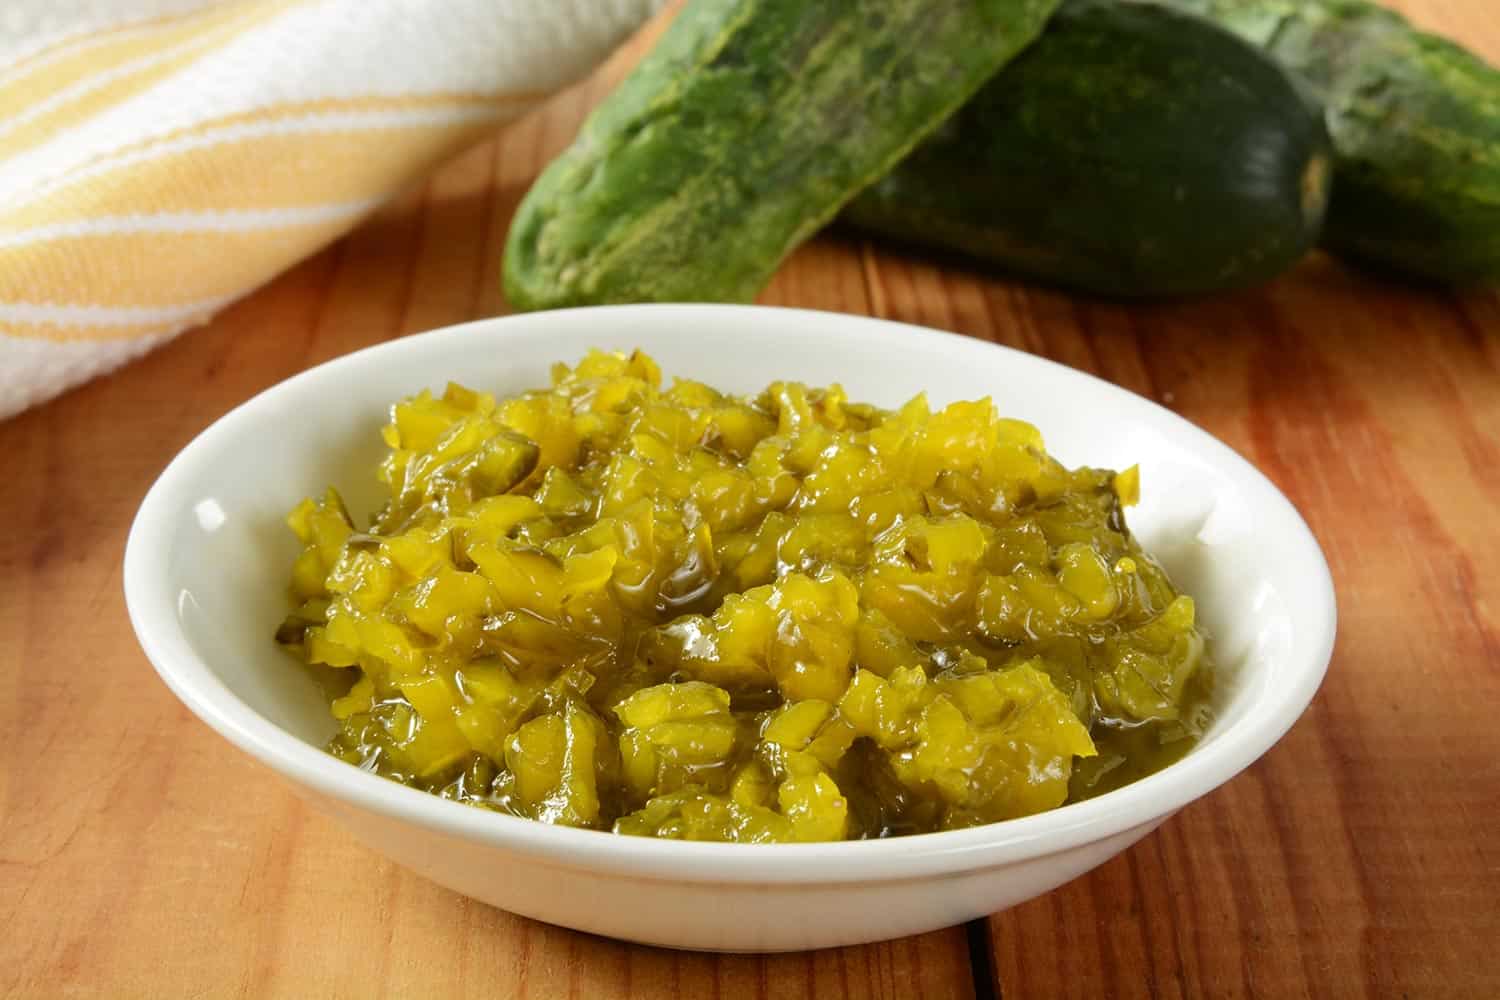 Relish and cucumbers